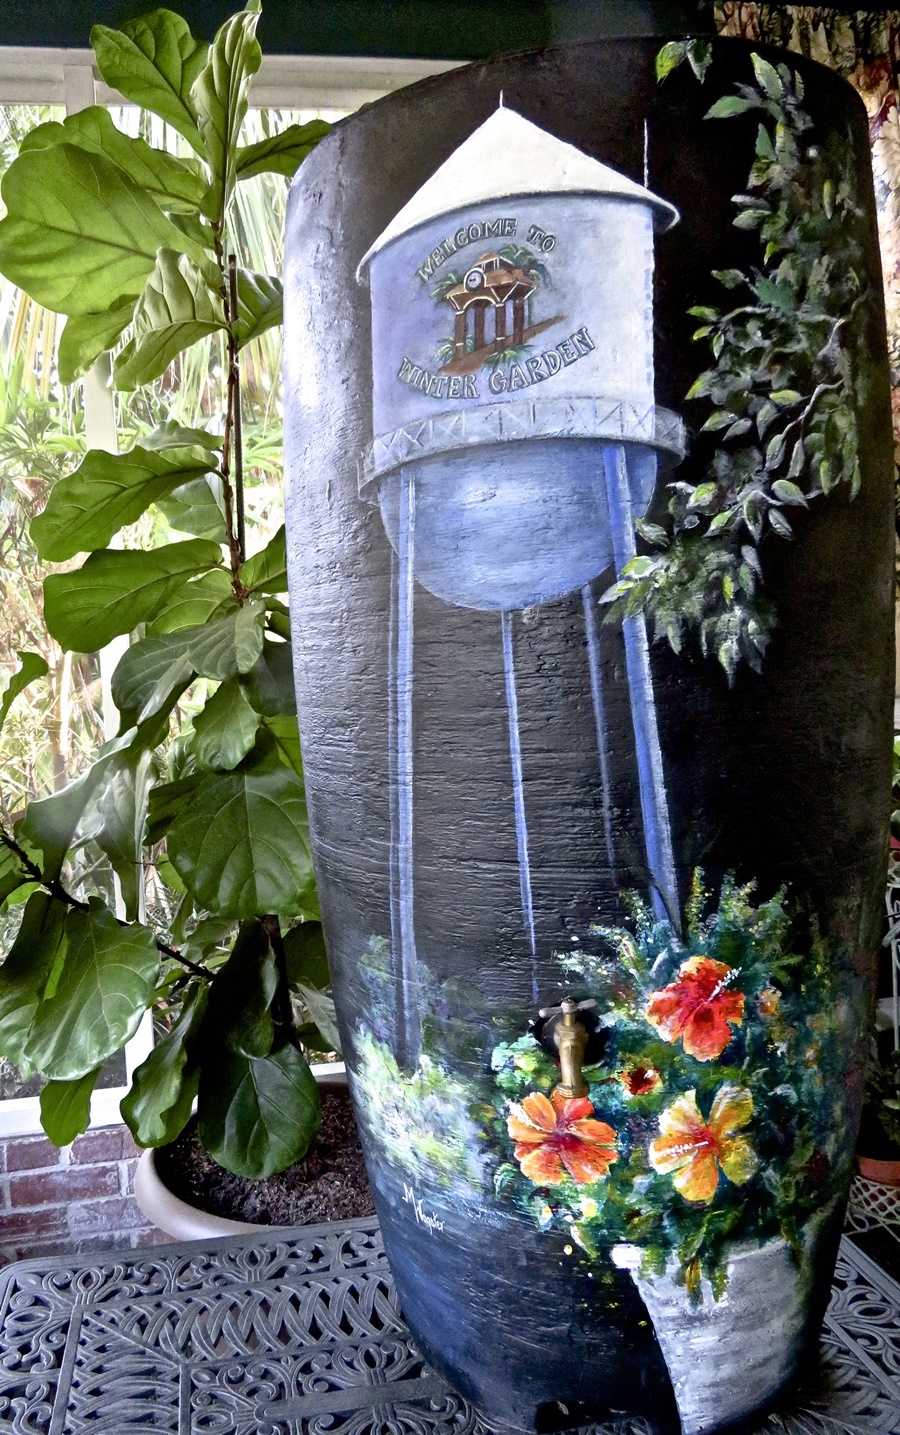 Marian Wagster painted a Winter Garden scene on a rain barrel included in the silent auction.